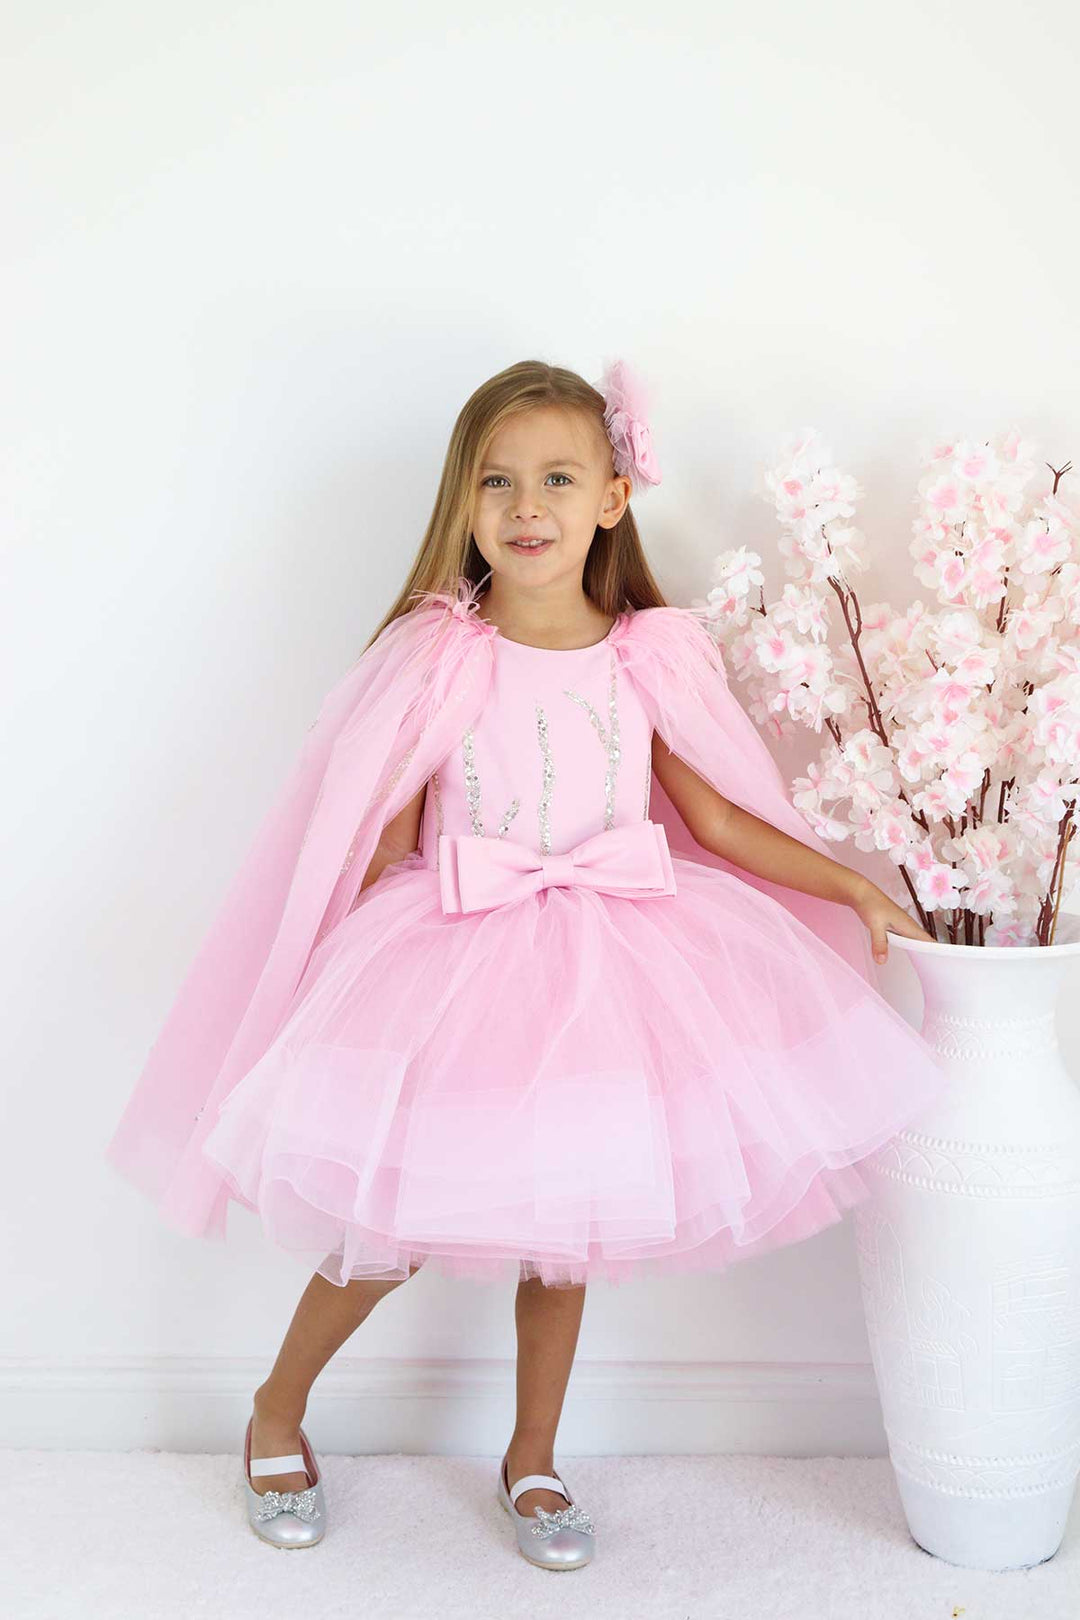 A pink birthday party dress. The dress has a knee length skirt, cape, and a pink bow at the waist. The skirt is made of layers of pink tulle